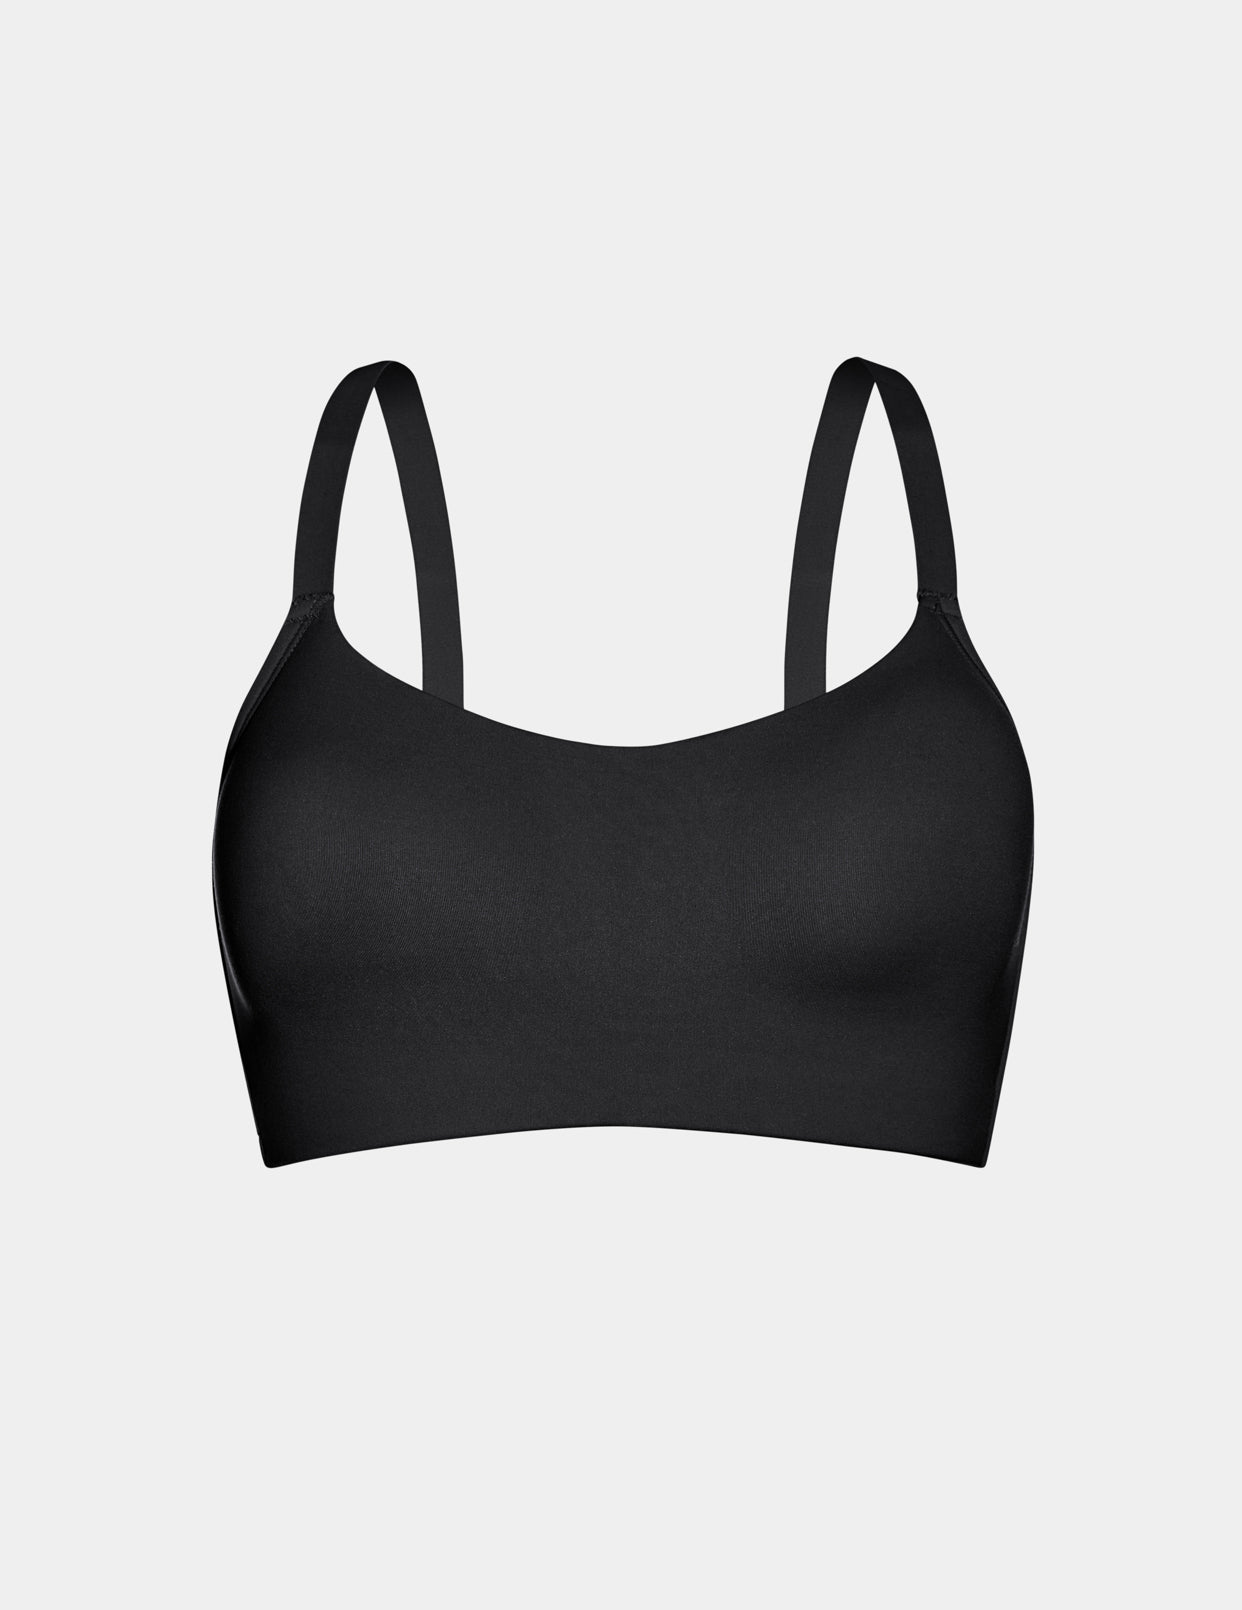 Knix® Wireless Bras  More Comfort ✓ More Support ✓ More Women